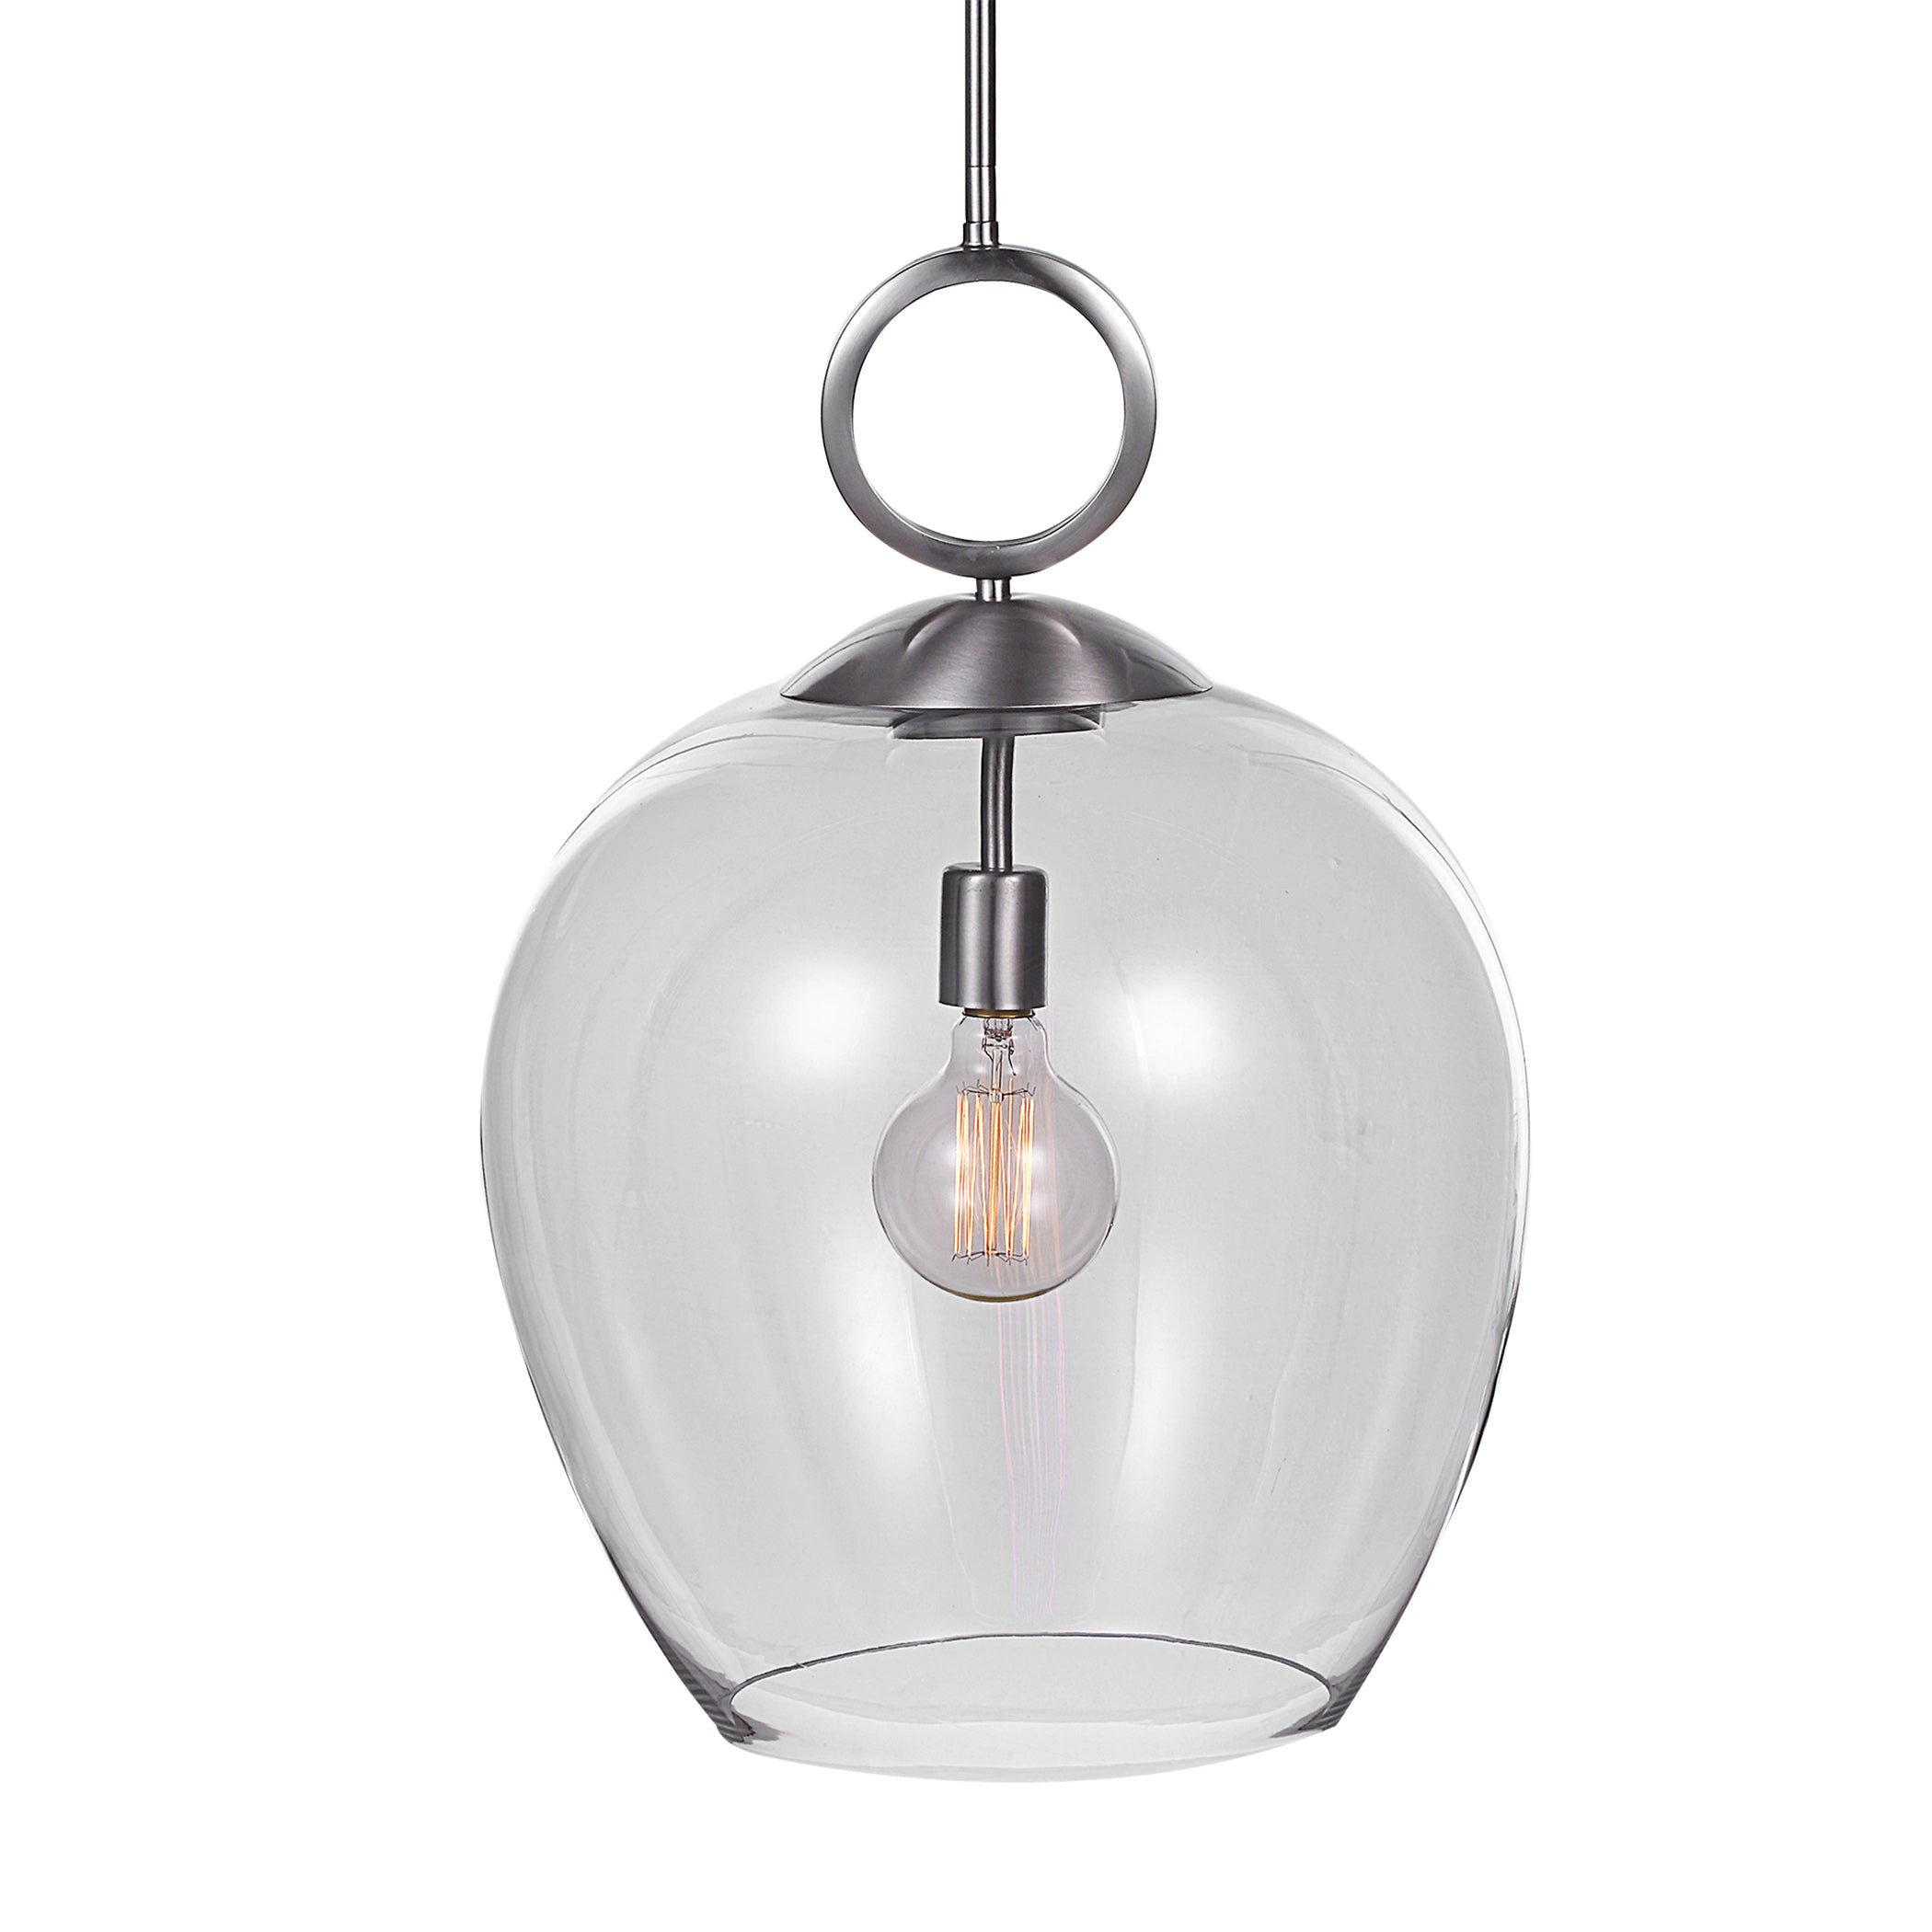 the-official-site-of-official-uttermost-22169-calix-nickel-1-light-glass-pendant-on-sale_7.jpg